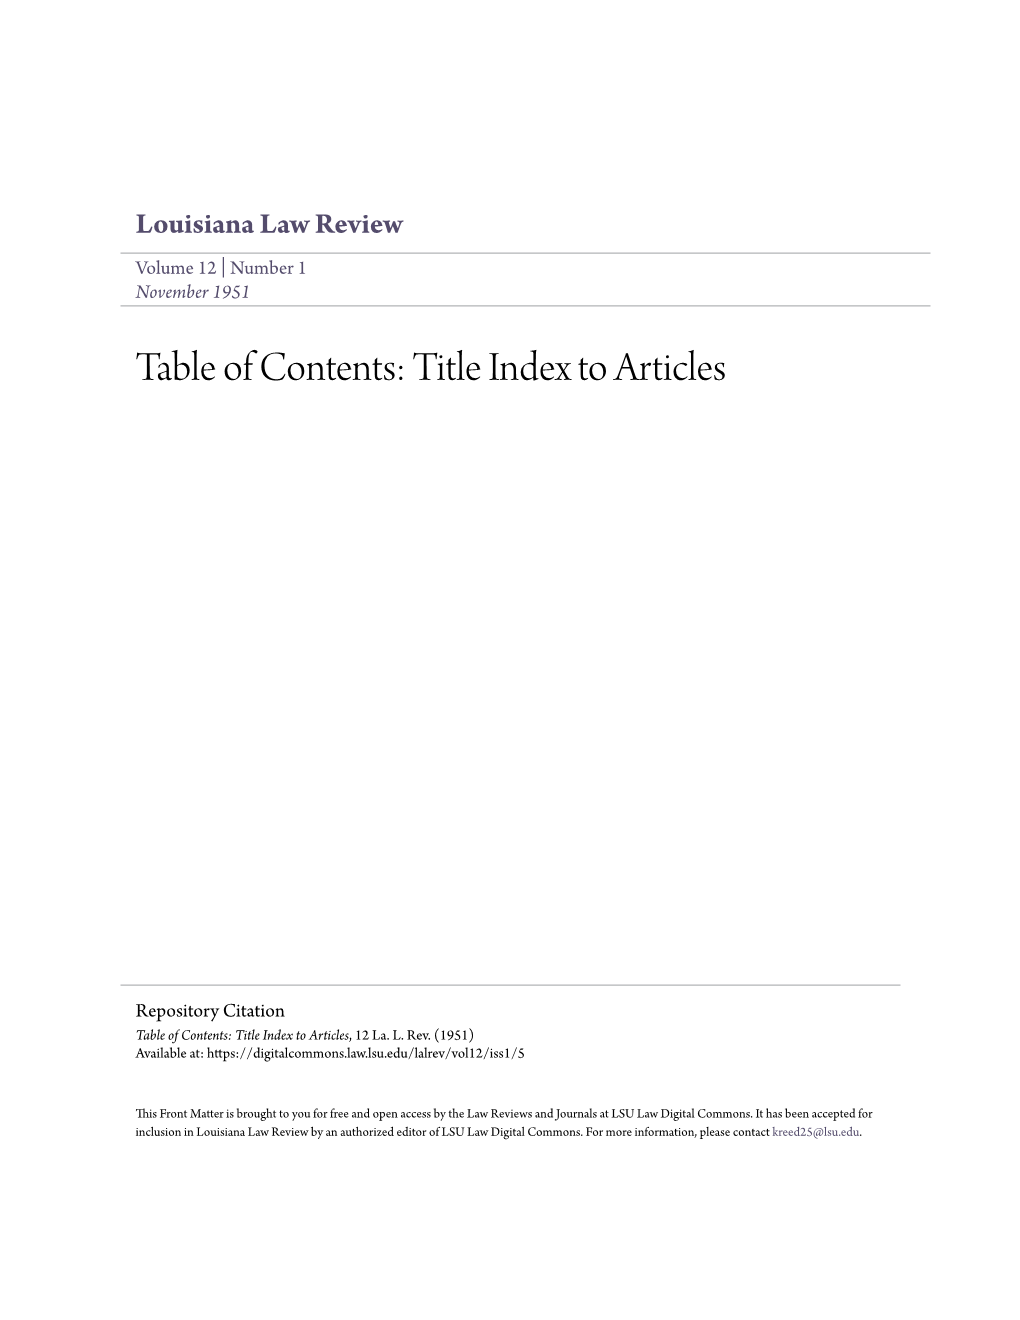 Table of Contents: Title Index to Articles